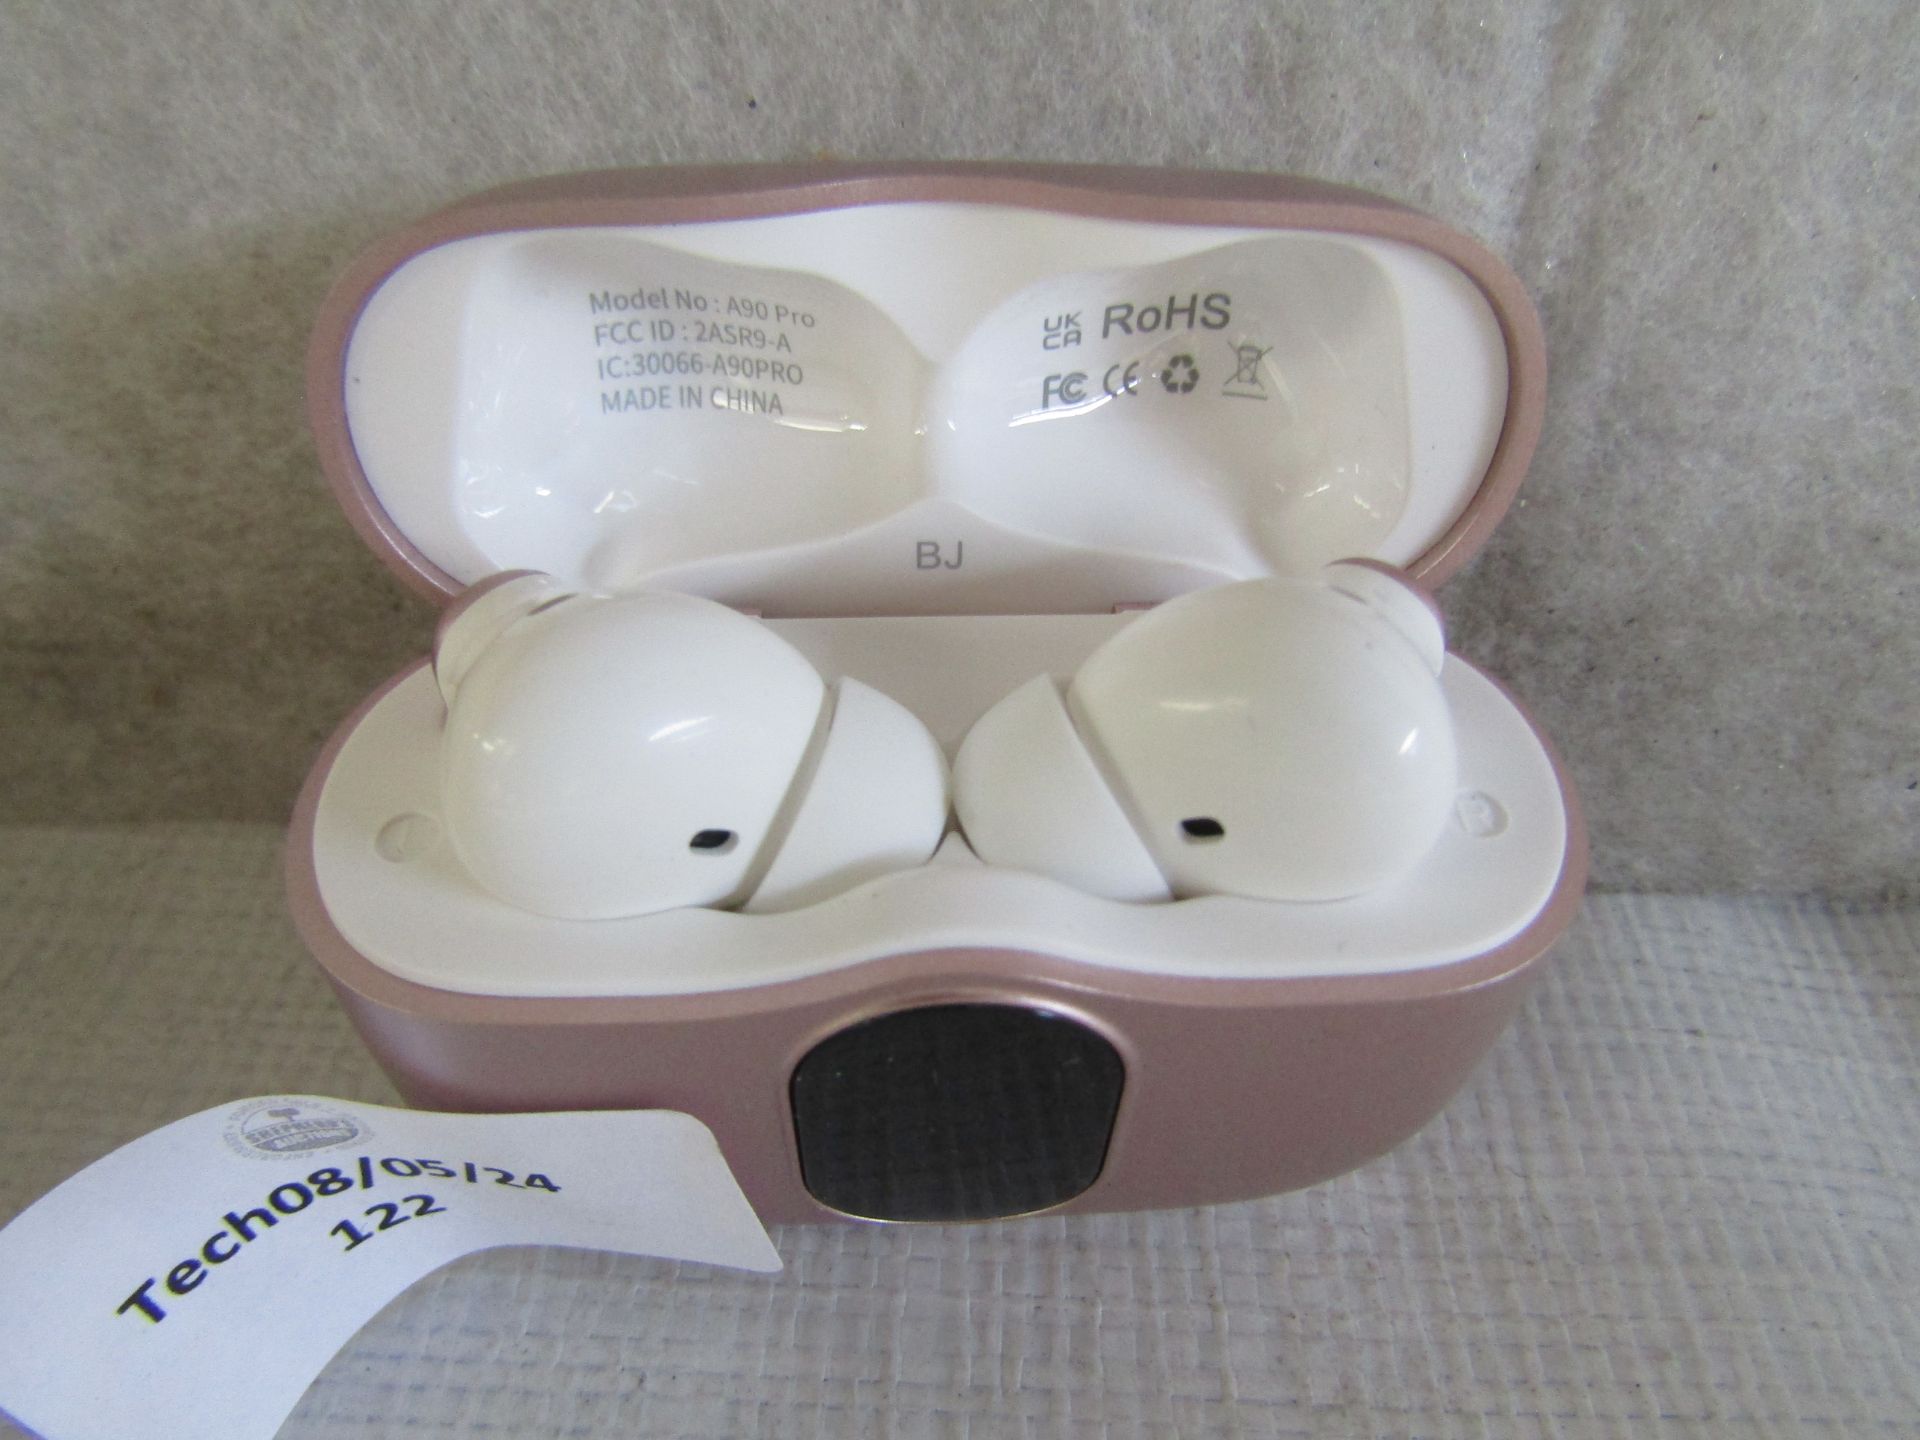 Bluetooth Earbuds With Charging Case - Untested & Unboxed.